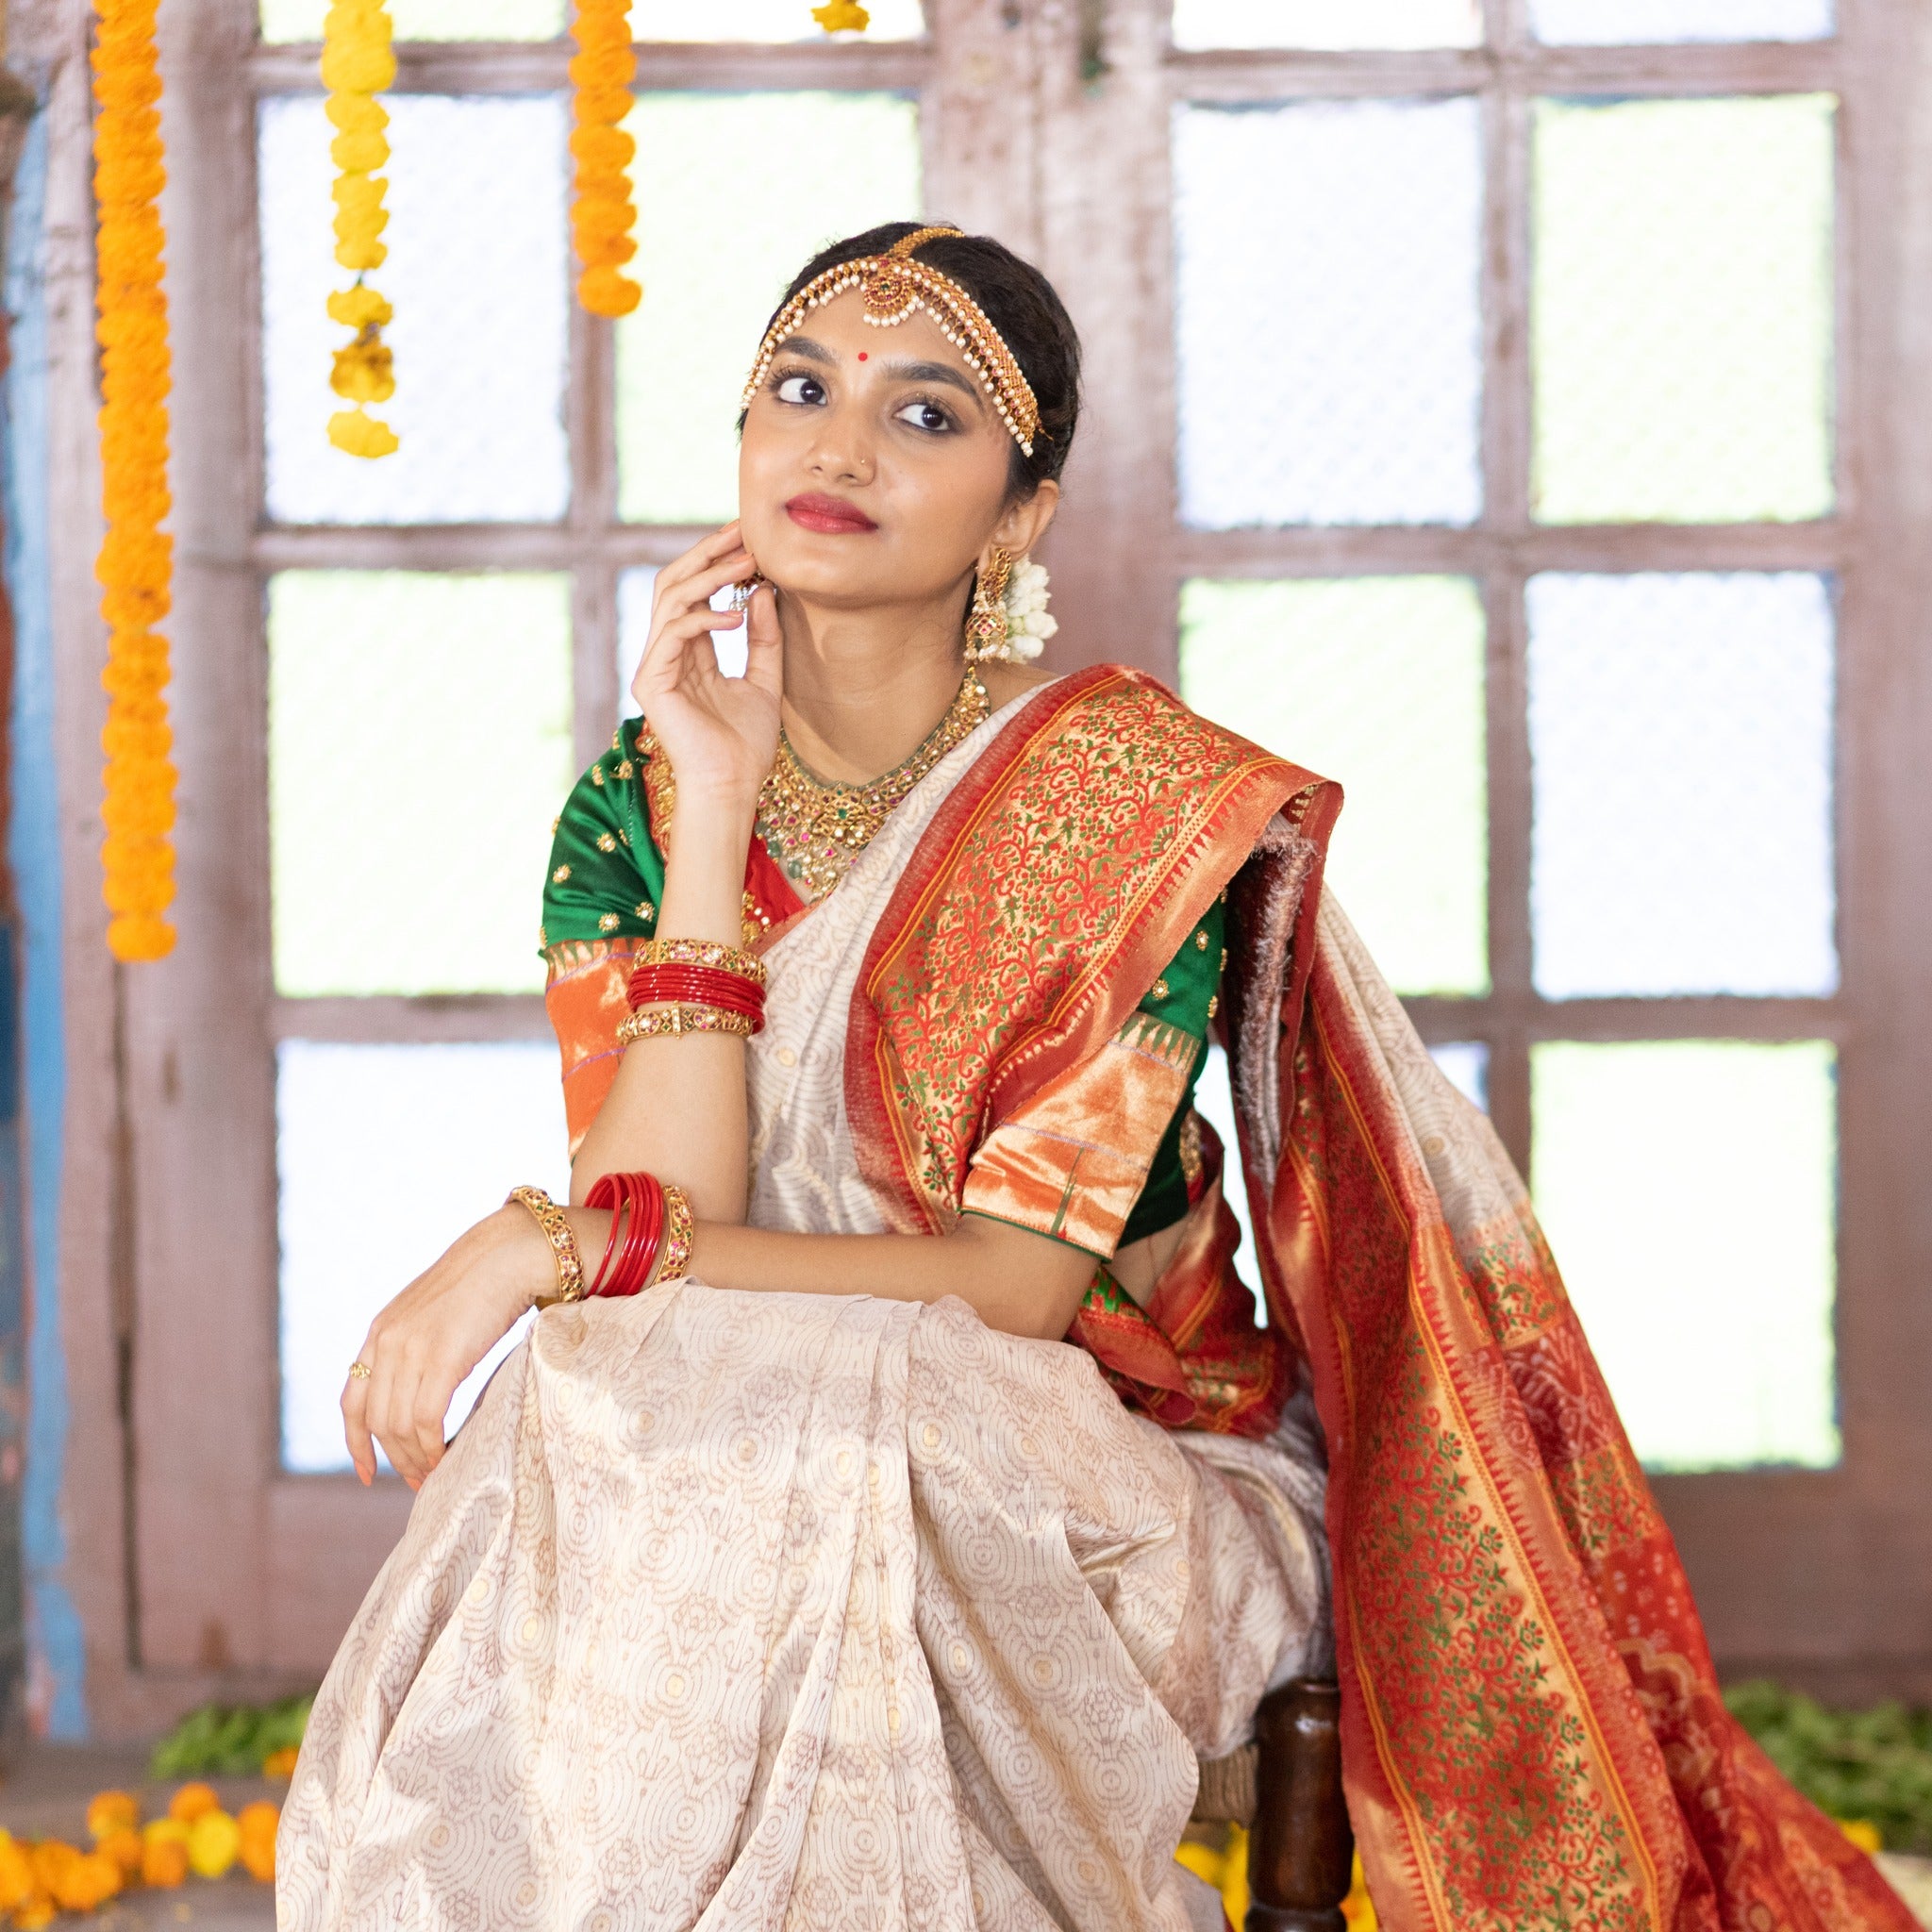 Where should I buy my wedding sarees in India?